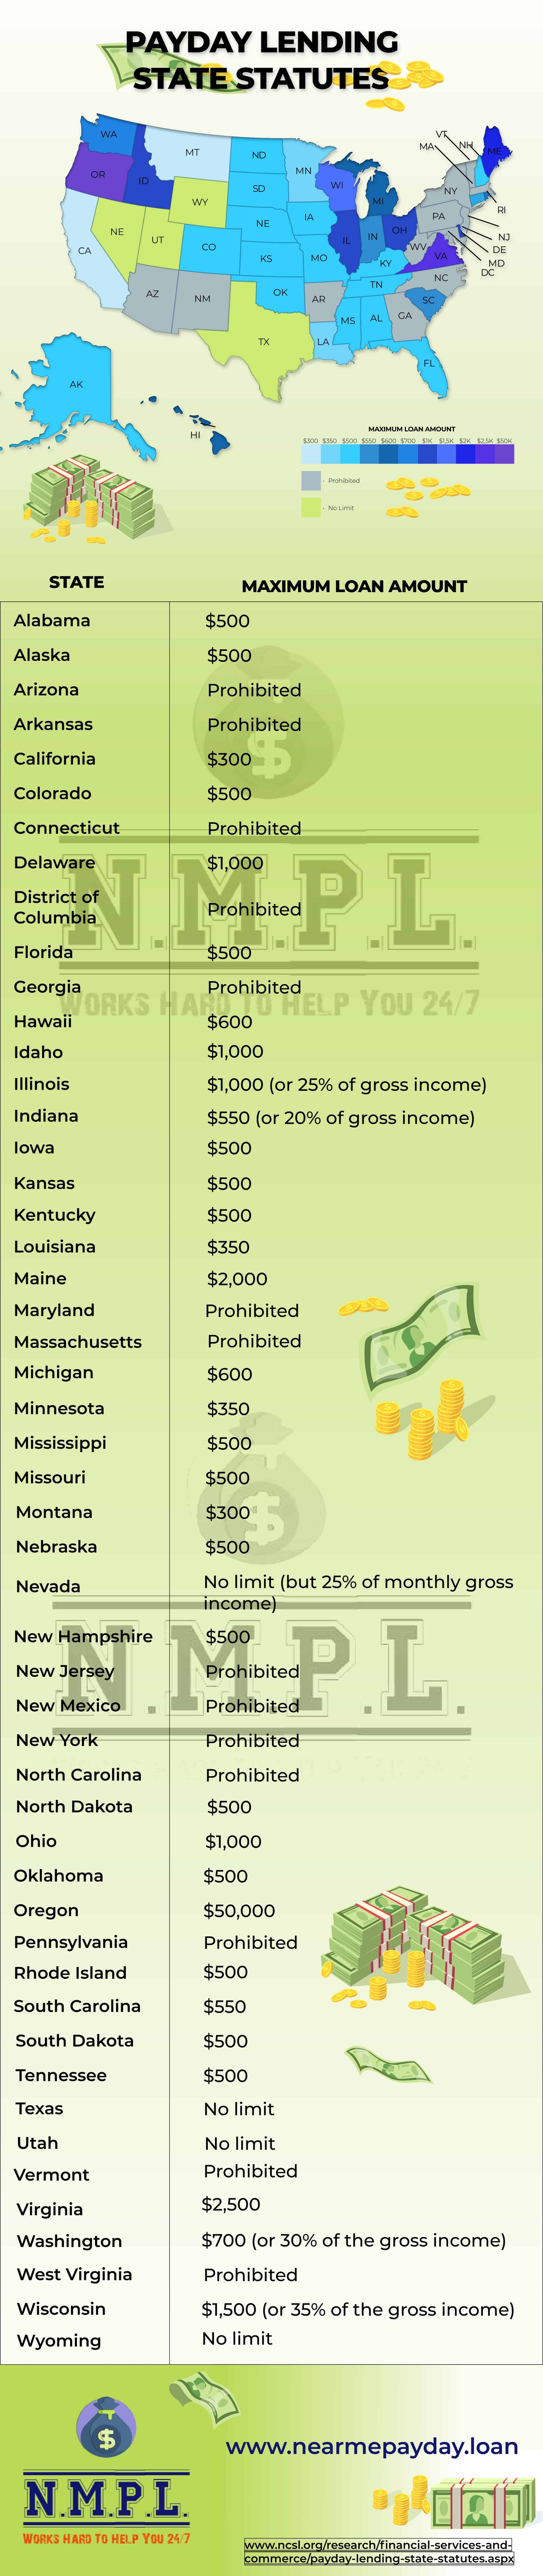 Payday Loans Maximum Amount by State of the United States